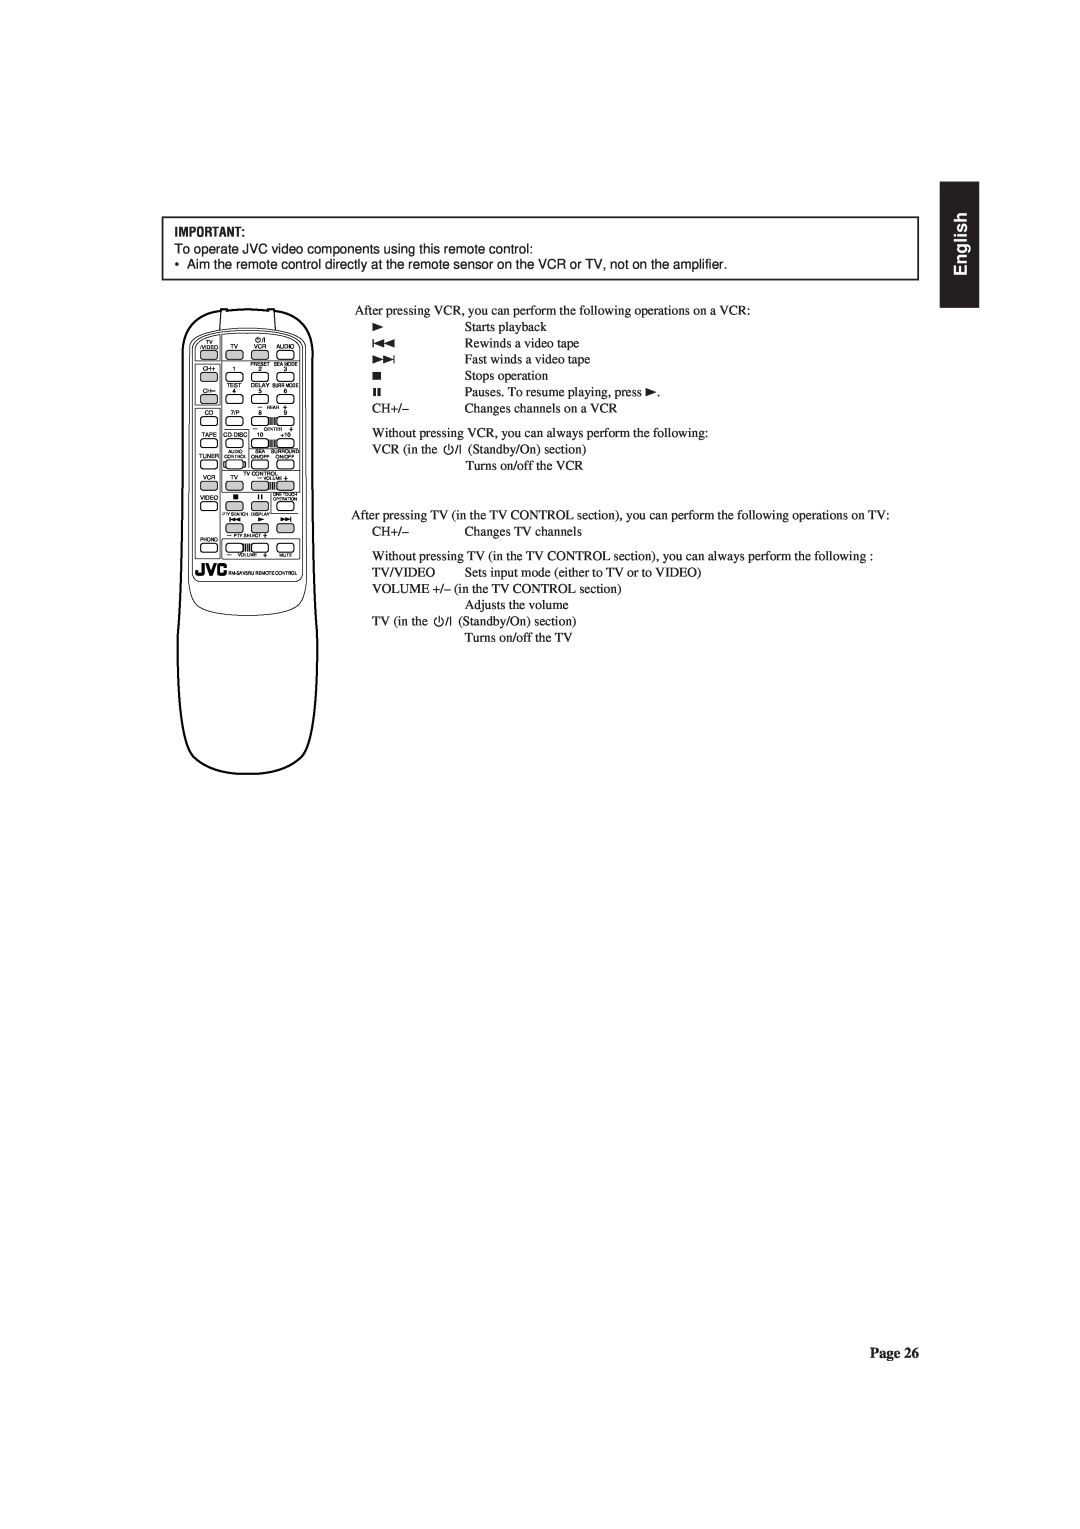 JVC AX-V55BK manual English, To operate JVC video components using this remote control 